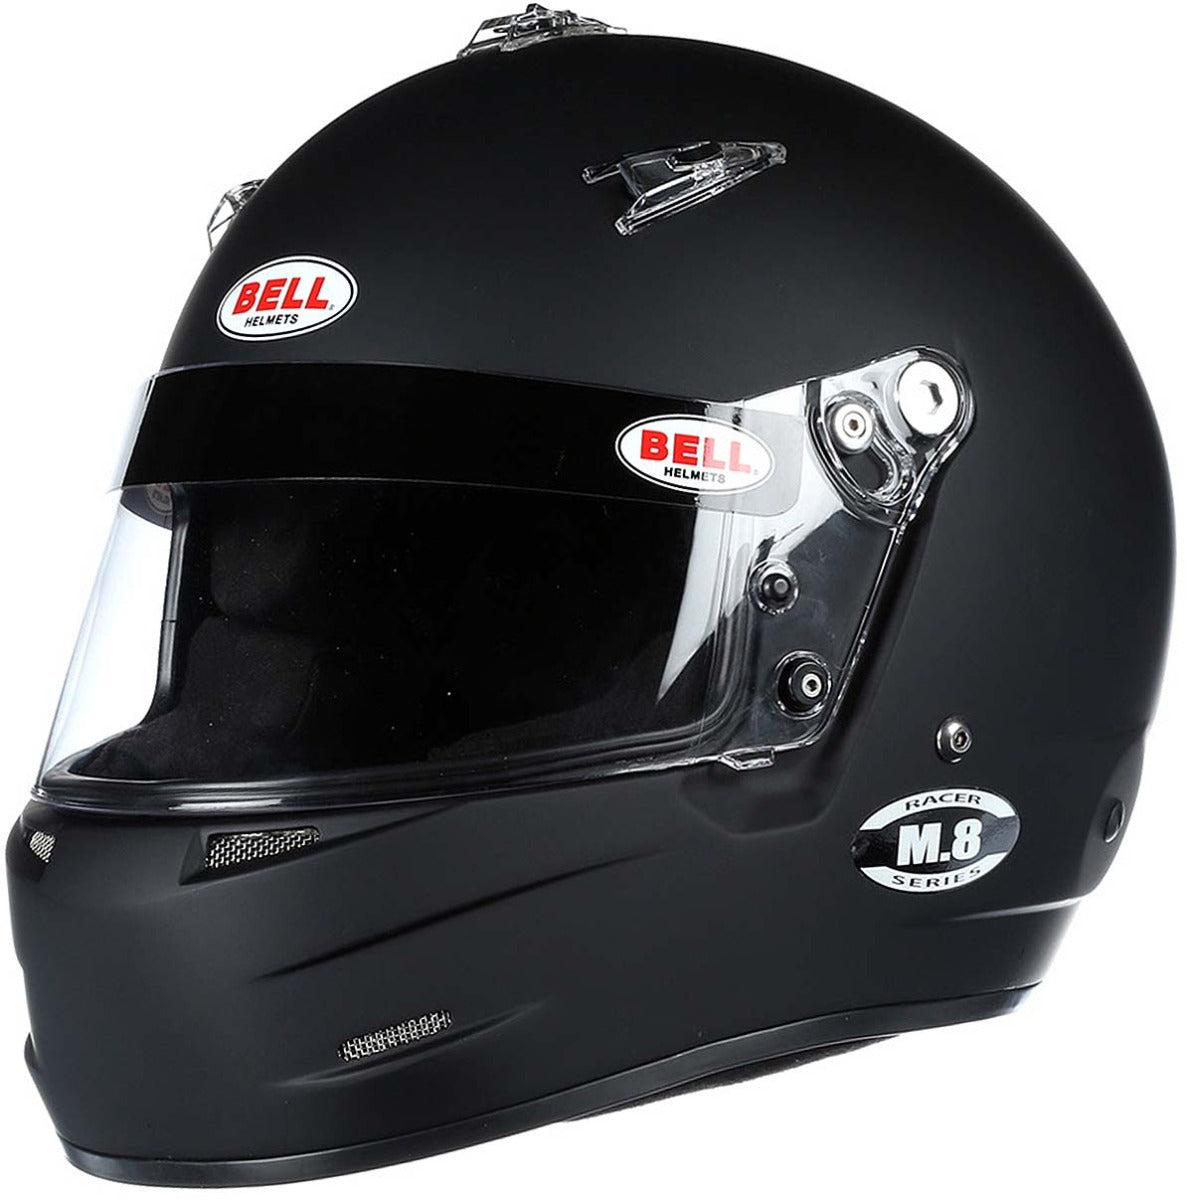 Bell M.8 Helmet SA2020 at Discovery Parts – DiscoveryParts